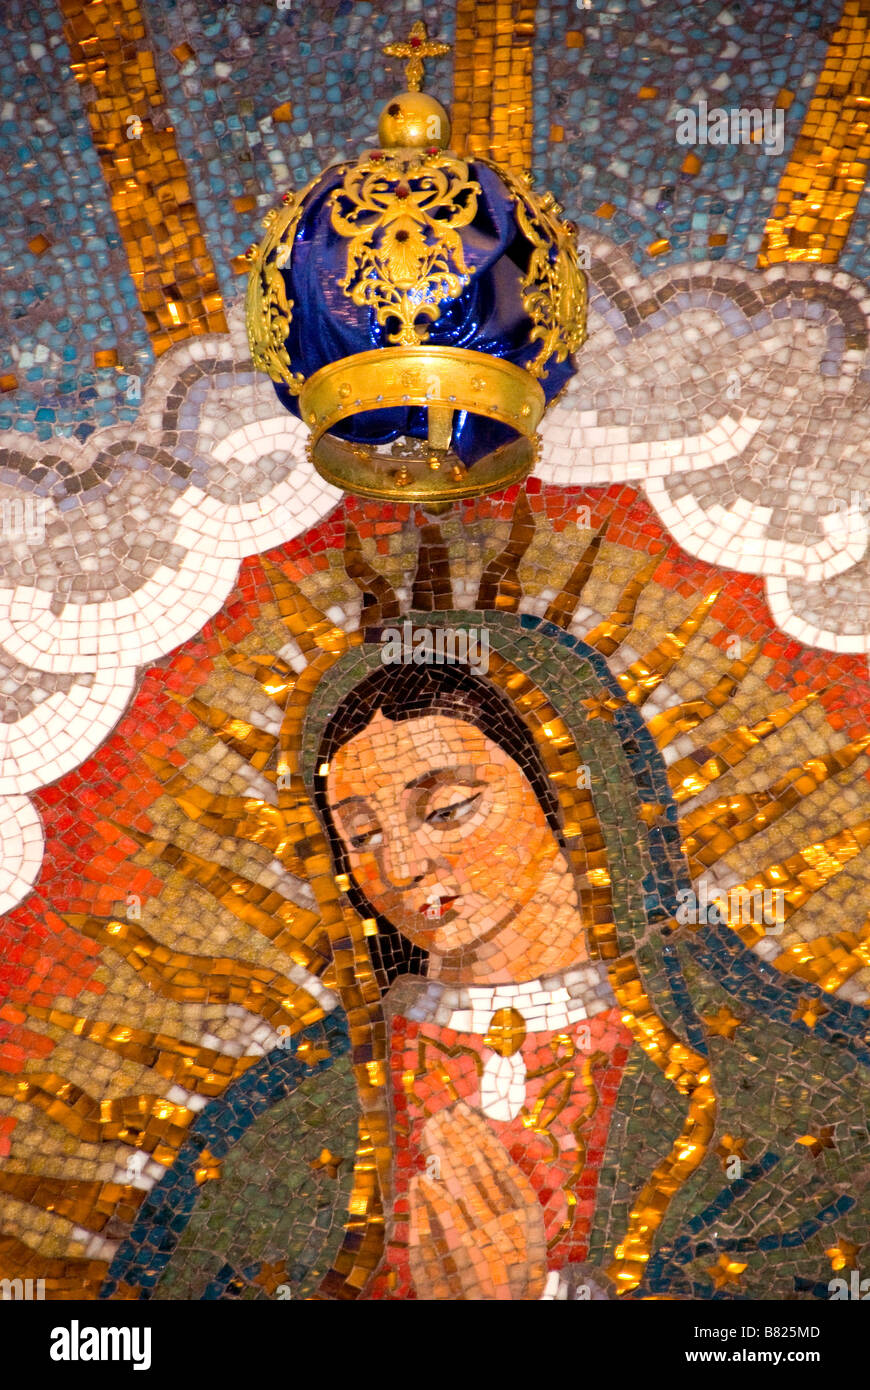 Our Lady of Guadalupe Church interior mural Houston Texas Stock Photo